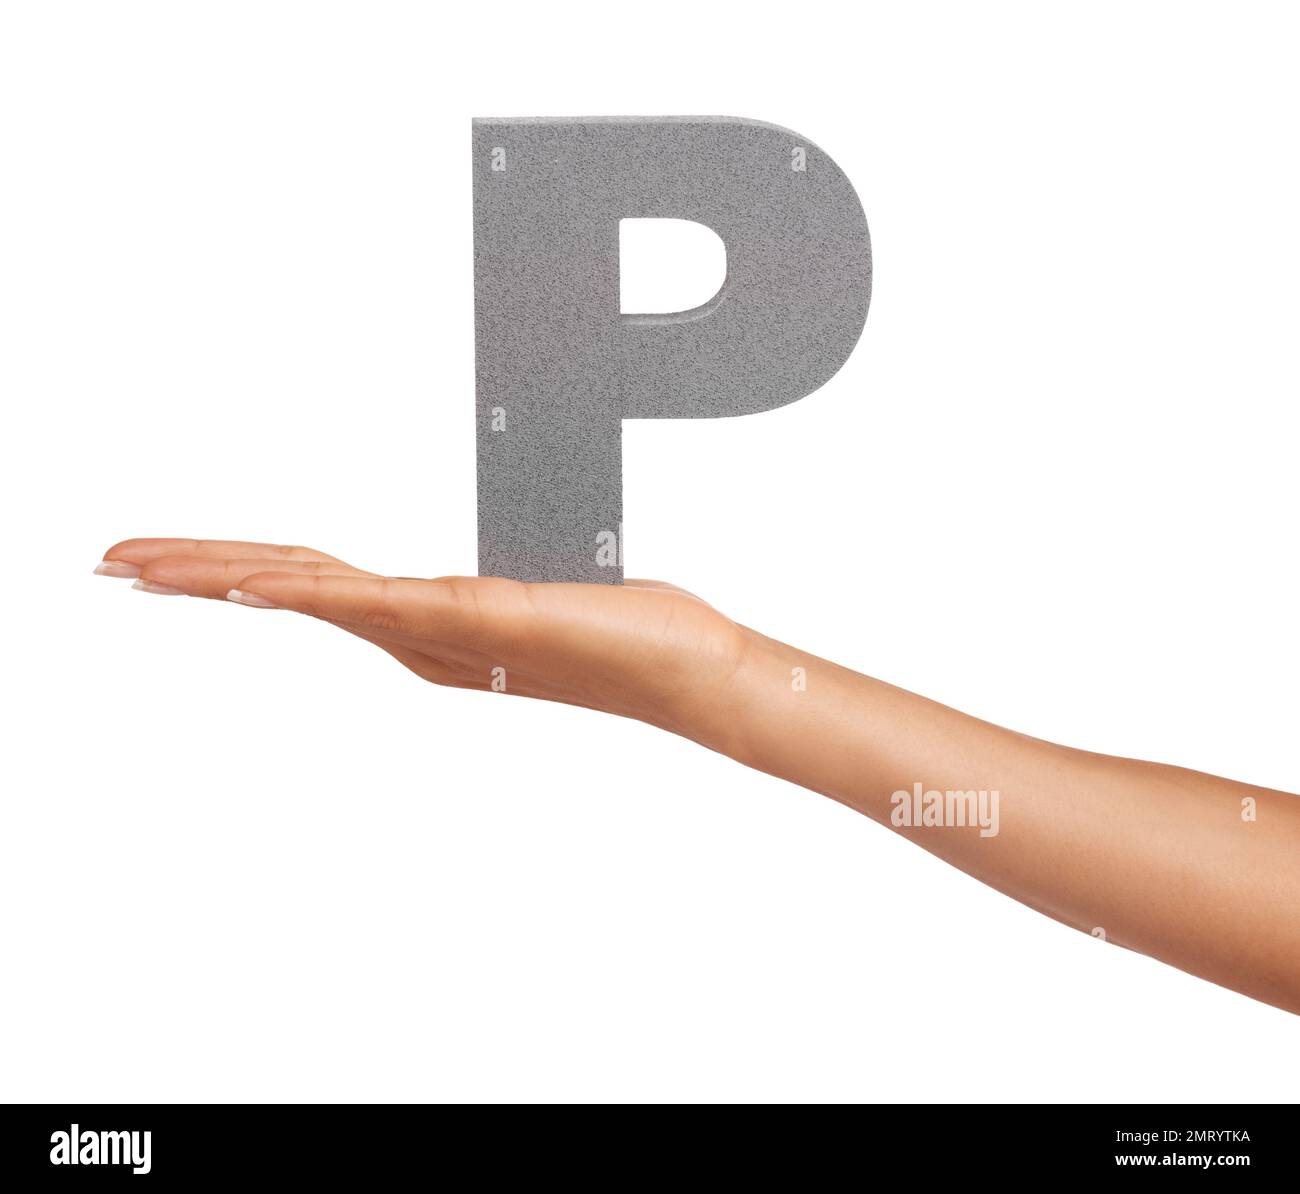 Teaching you your letters. A young woman holding a capital letter P isolated on a white background. Stock Photo